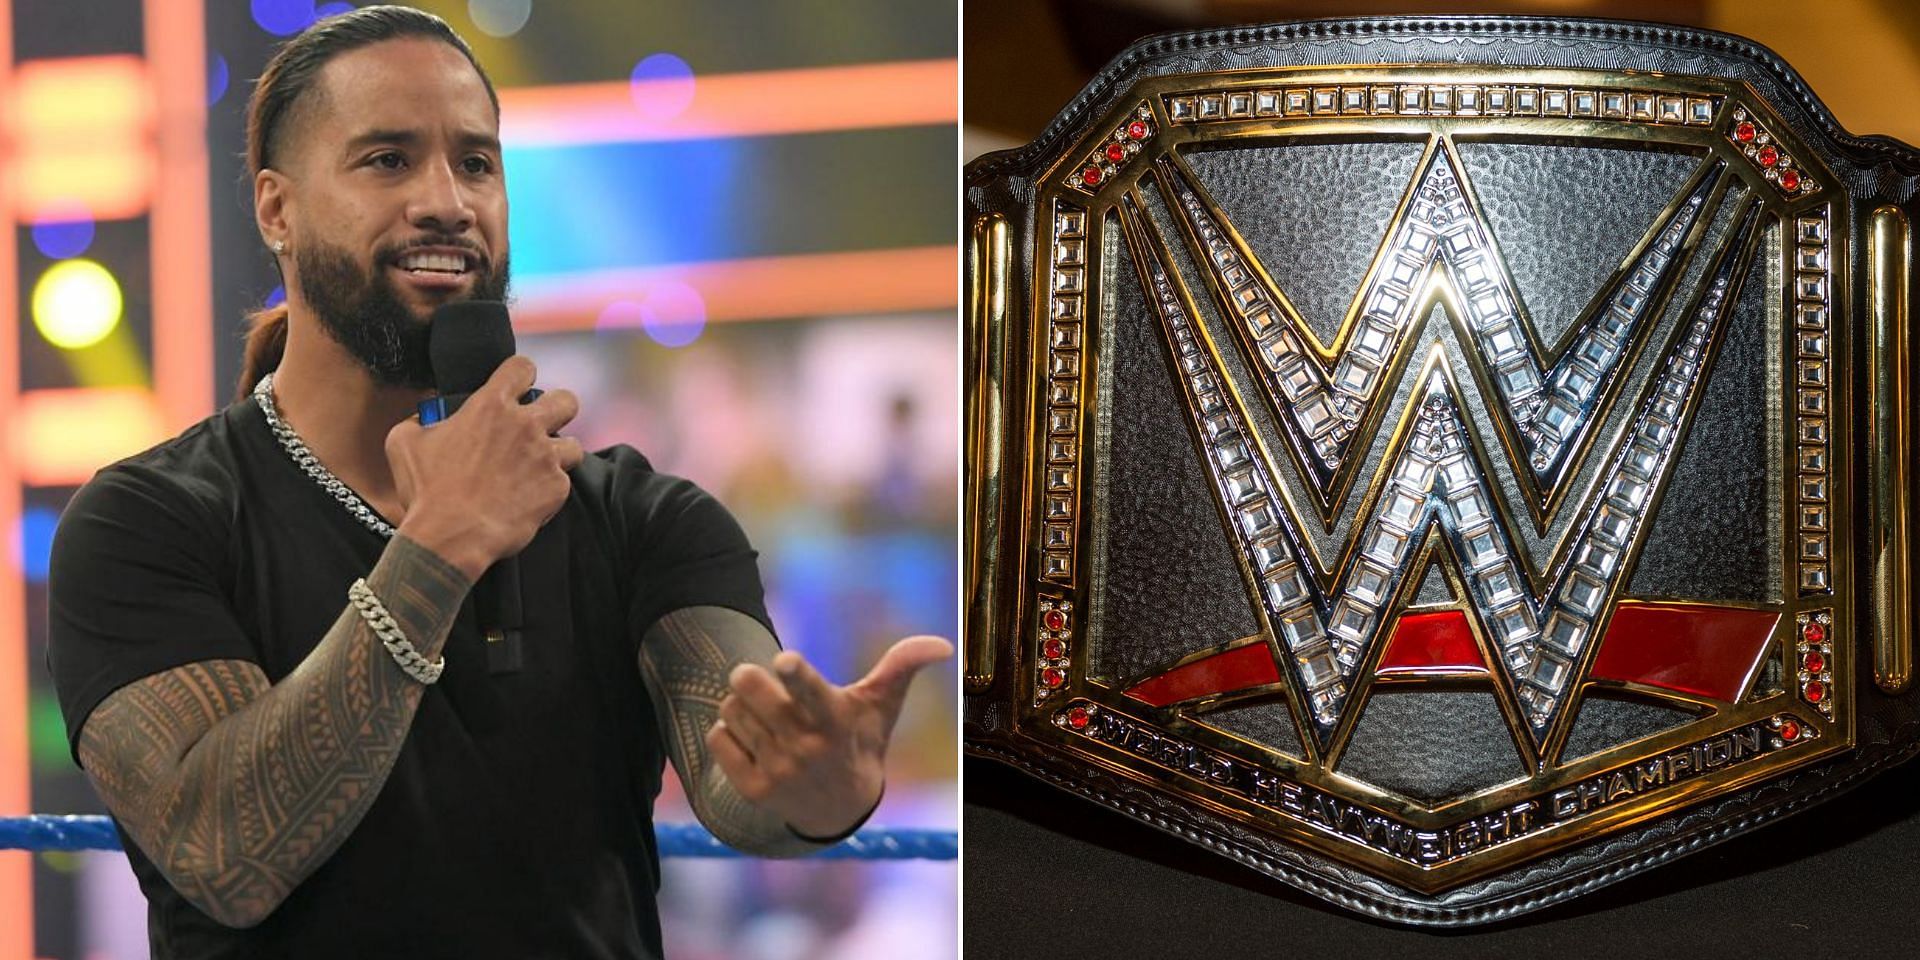 Jimmy Uso will face this former WWE Champion